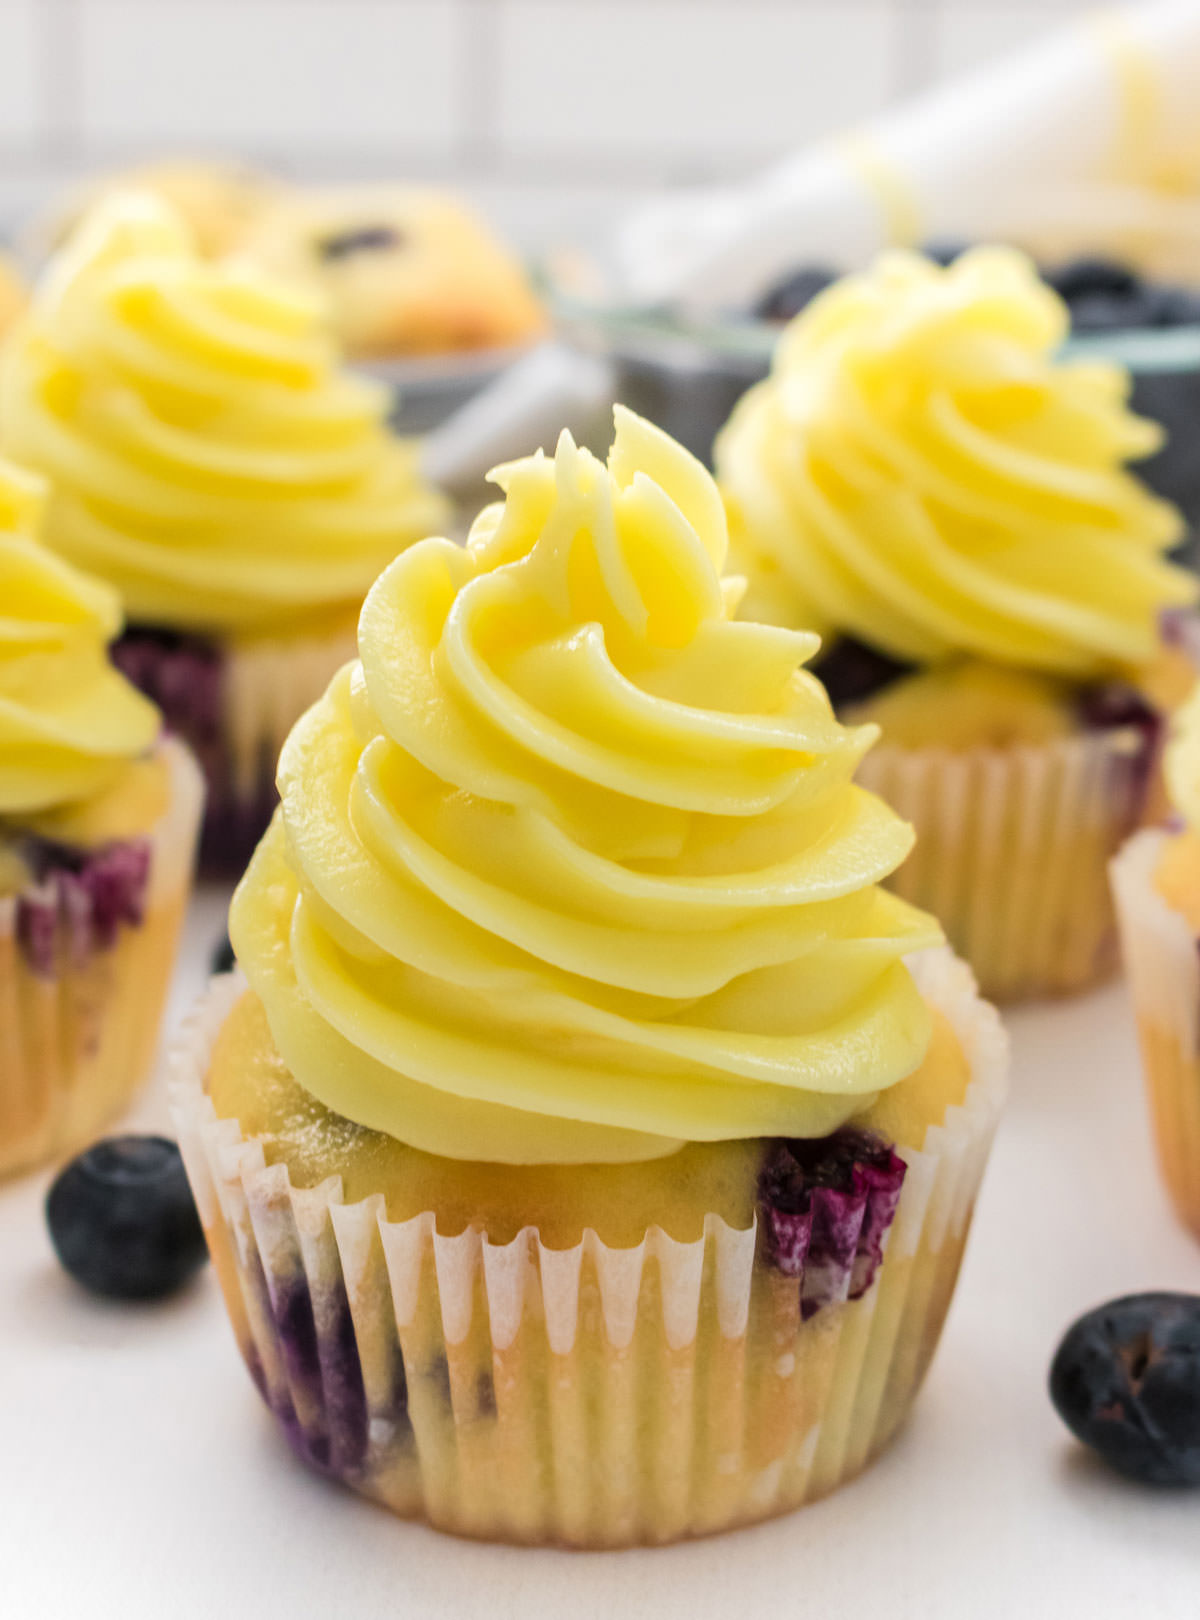 Closeup of a Lemon Blueberry Cupcake with Lemon Frosting sitting on a white table surrounded by other cupcakes and fresh blueberries.